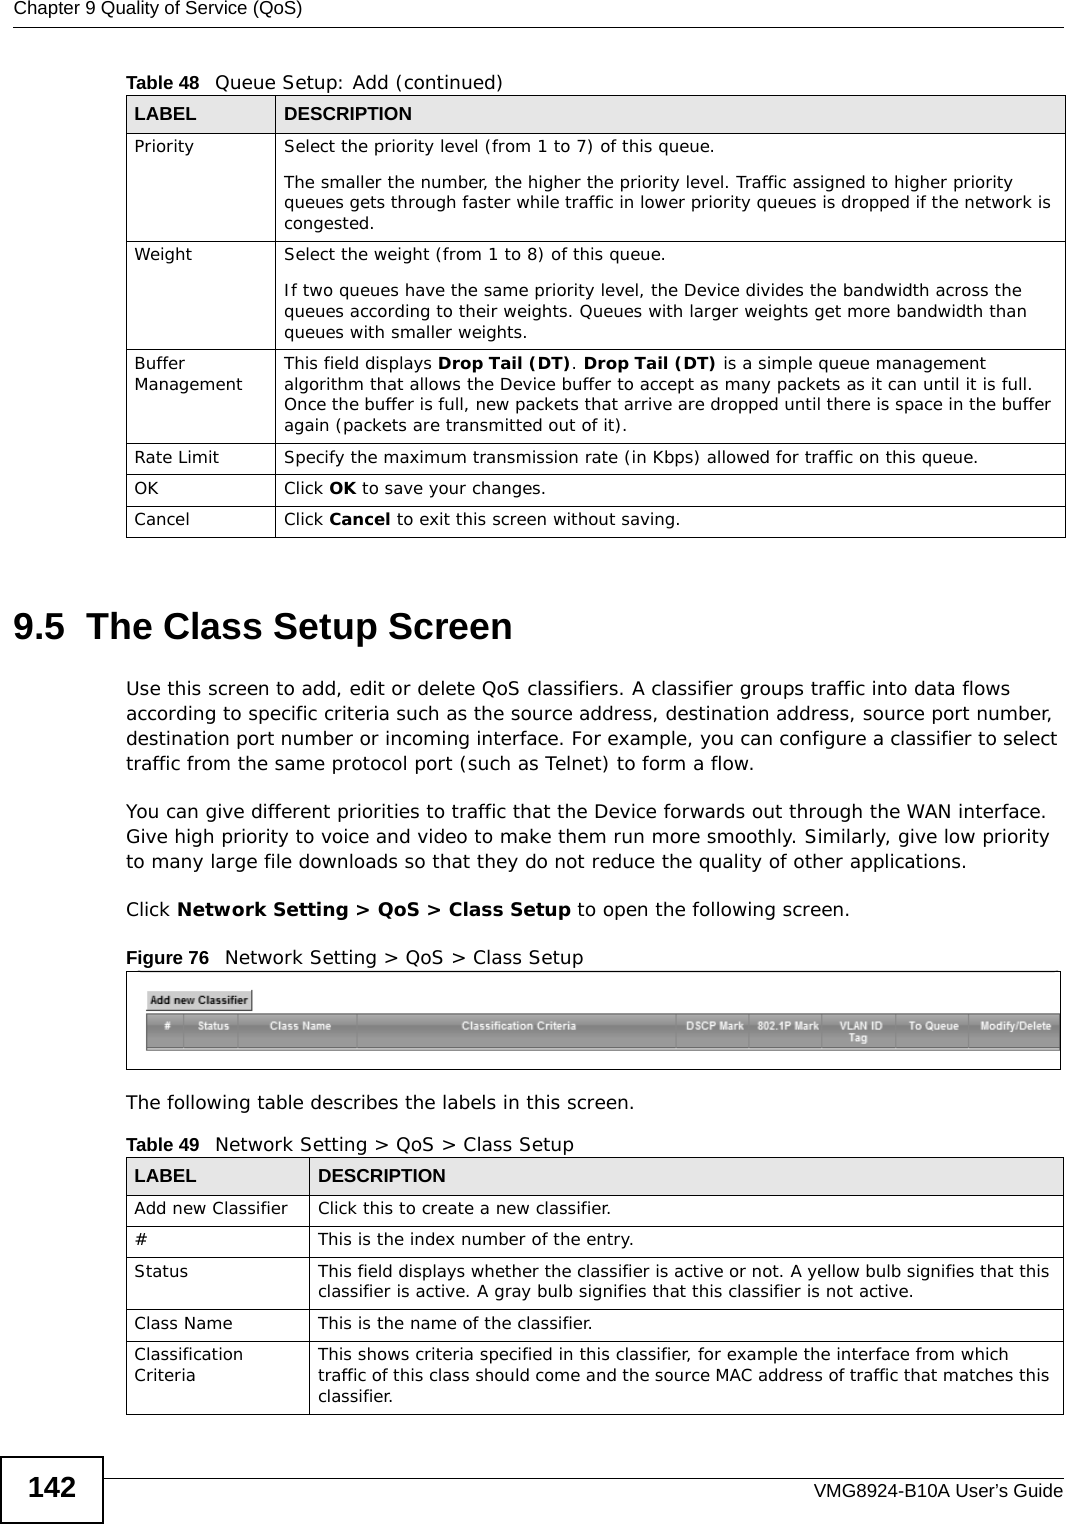 Chapter 9 Quality of Service (QoS)VMG8924-B10A User’s Guide1429.5  The Class Setup Screen Use this screen to add, edit or delete QoS classifiers. A classifier groups traffic into data flows according to specific criteria such as the source address, destination address, source port number, destination port number or incoming interface. For example, you can configure a classifier to select traffic from the same protocol port (such as Telnet) to form a flow.You can give different priorities to traffic that the Device forwards out through the WAN interface. Give high priority to voice and video to make them run more smoothly. Similarly, give low priority to many large file downloads so that they do not reduce the quality of other applications. Click Network Setting &gt; QoS &gt; Class Setup to open the following screen.Figure 76   Network Setting &gt; QoS &gt; Class Setup The following table describes the labels in this screen.  Priority Select the priority level (from 1 to 7) of this queue.The smaller the number, the higher the priority level. Traffic assigned to higher priority queues gets through faster while traffic in lower priority queues is dropped if the network is congested.Weight Select the weight (from 1 to 8) of this queue. If two queues have the same priority level, the Device divides the bandwidth across the queues according to their weights. Queues with larger weights get more bandwidth than queues with smaller weights.Buffer Management This field displays Drop Tail (DT). Drop Tail (DT) is a simple queue management algorithm that allows the Device buffer to accept as many packets as it can until it is full. Once the buffer is full, new packets that arrive are dropped until there is space in the buffer again (packets are transmitted out of it). Rate Limit Specify the maximum transmission rate (in Kbps) allowed for traffic on this queue.OK Click OK to save your changes.Cancel Click Cancel to exit this screen without saving.Table 48   Queue Setup: Add (continued)LABEL DESCRIPTIONTable 49   Network Setting &gt; QoS &gt; Class SetupLABEL DESCRIPTIONAdd new Classifier Click this to create a new classifier.#This is the index number of the entry.Status This field displays whether the classifier is active or not. A yellow bulb signifies that this classifier is active. A gray bulb signifies that this classifier is not active.Class Name This is the name of the classifier.Classification Criteria This shows criteria specified in this classifier, for example the interface from which traffic of this class should come and the source MAC address of traffic that matches this classifier.